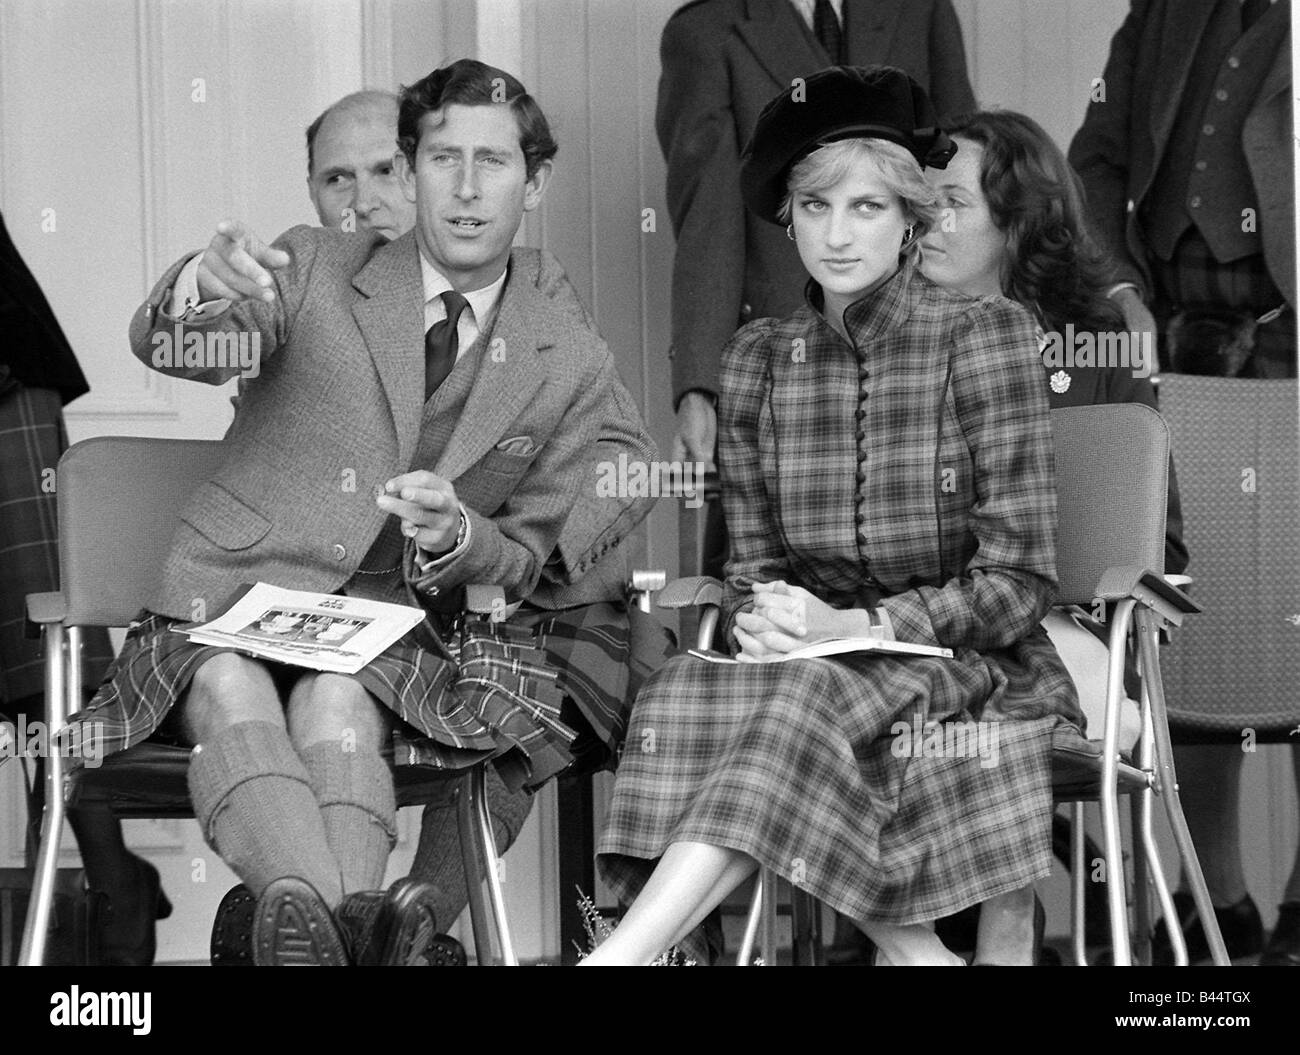 Prince Charles and Princess Diana September 1981 Royalty at the Braemar for the Highland games Stock Photo